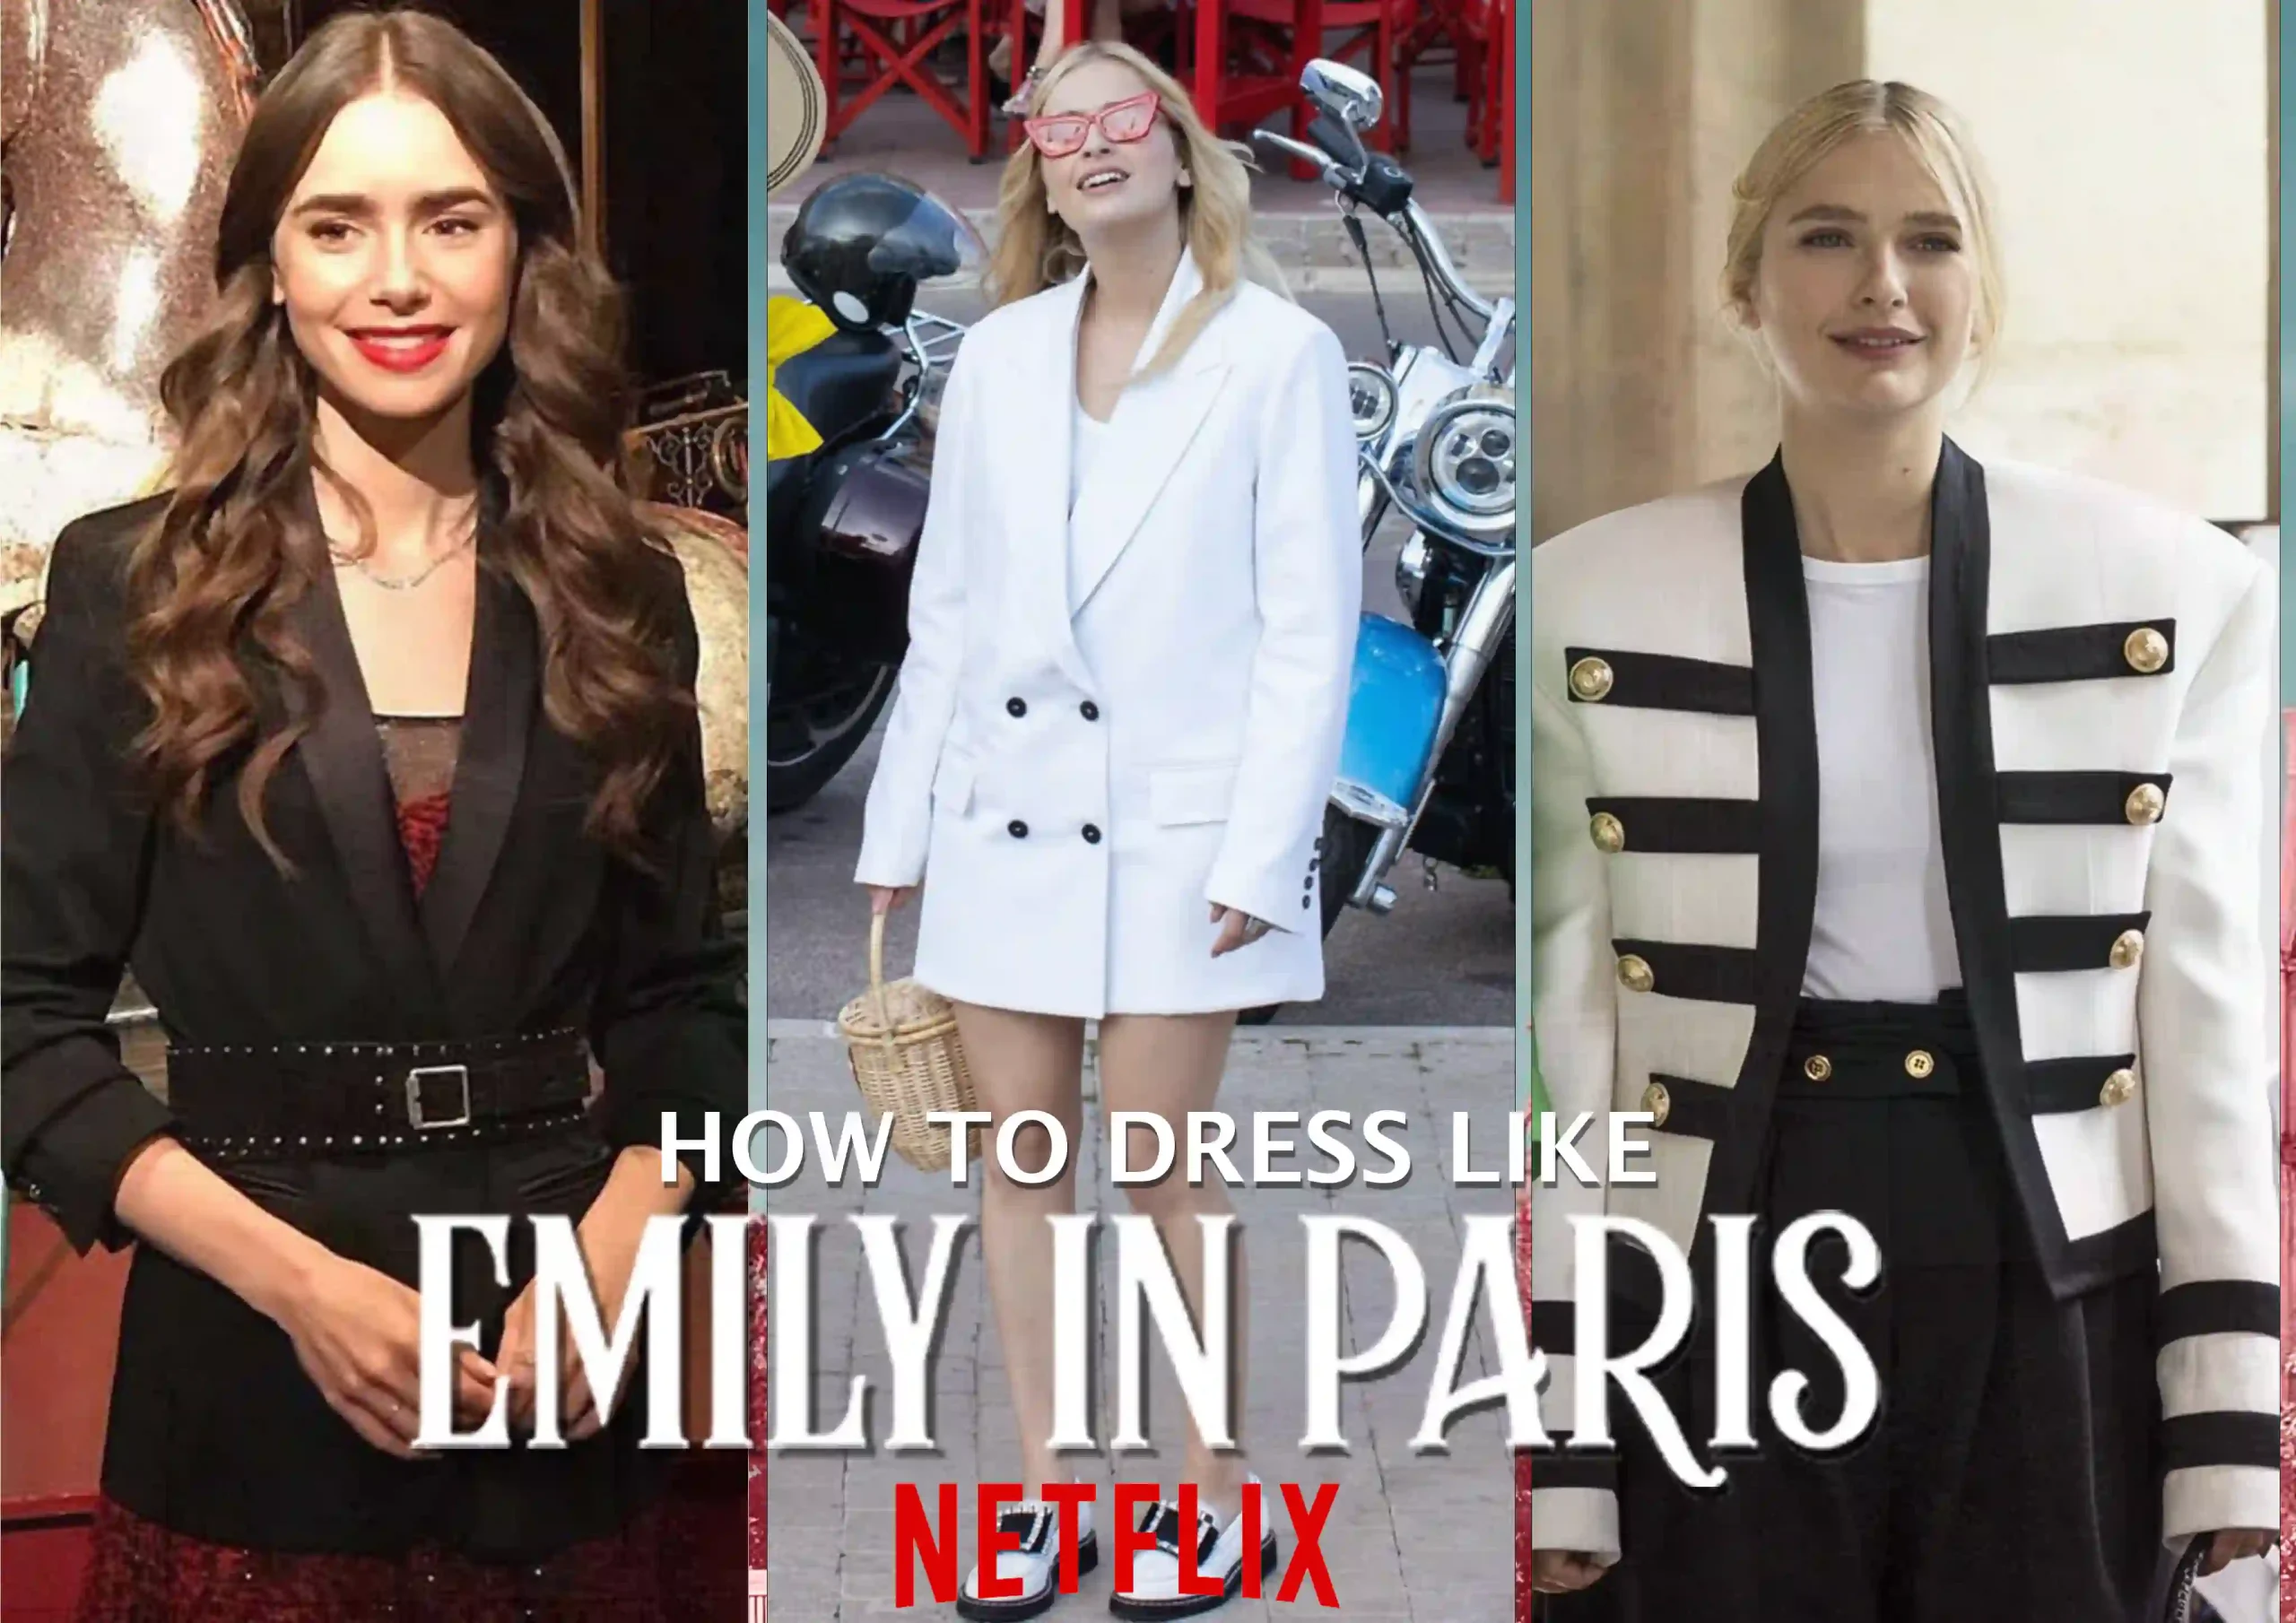 Steal the Look - Dress Like Camille from Emily in Paris 2